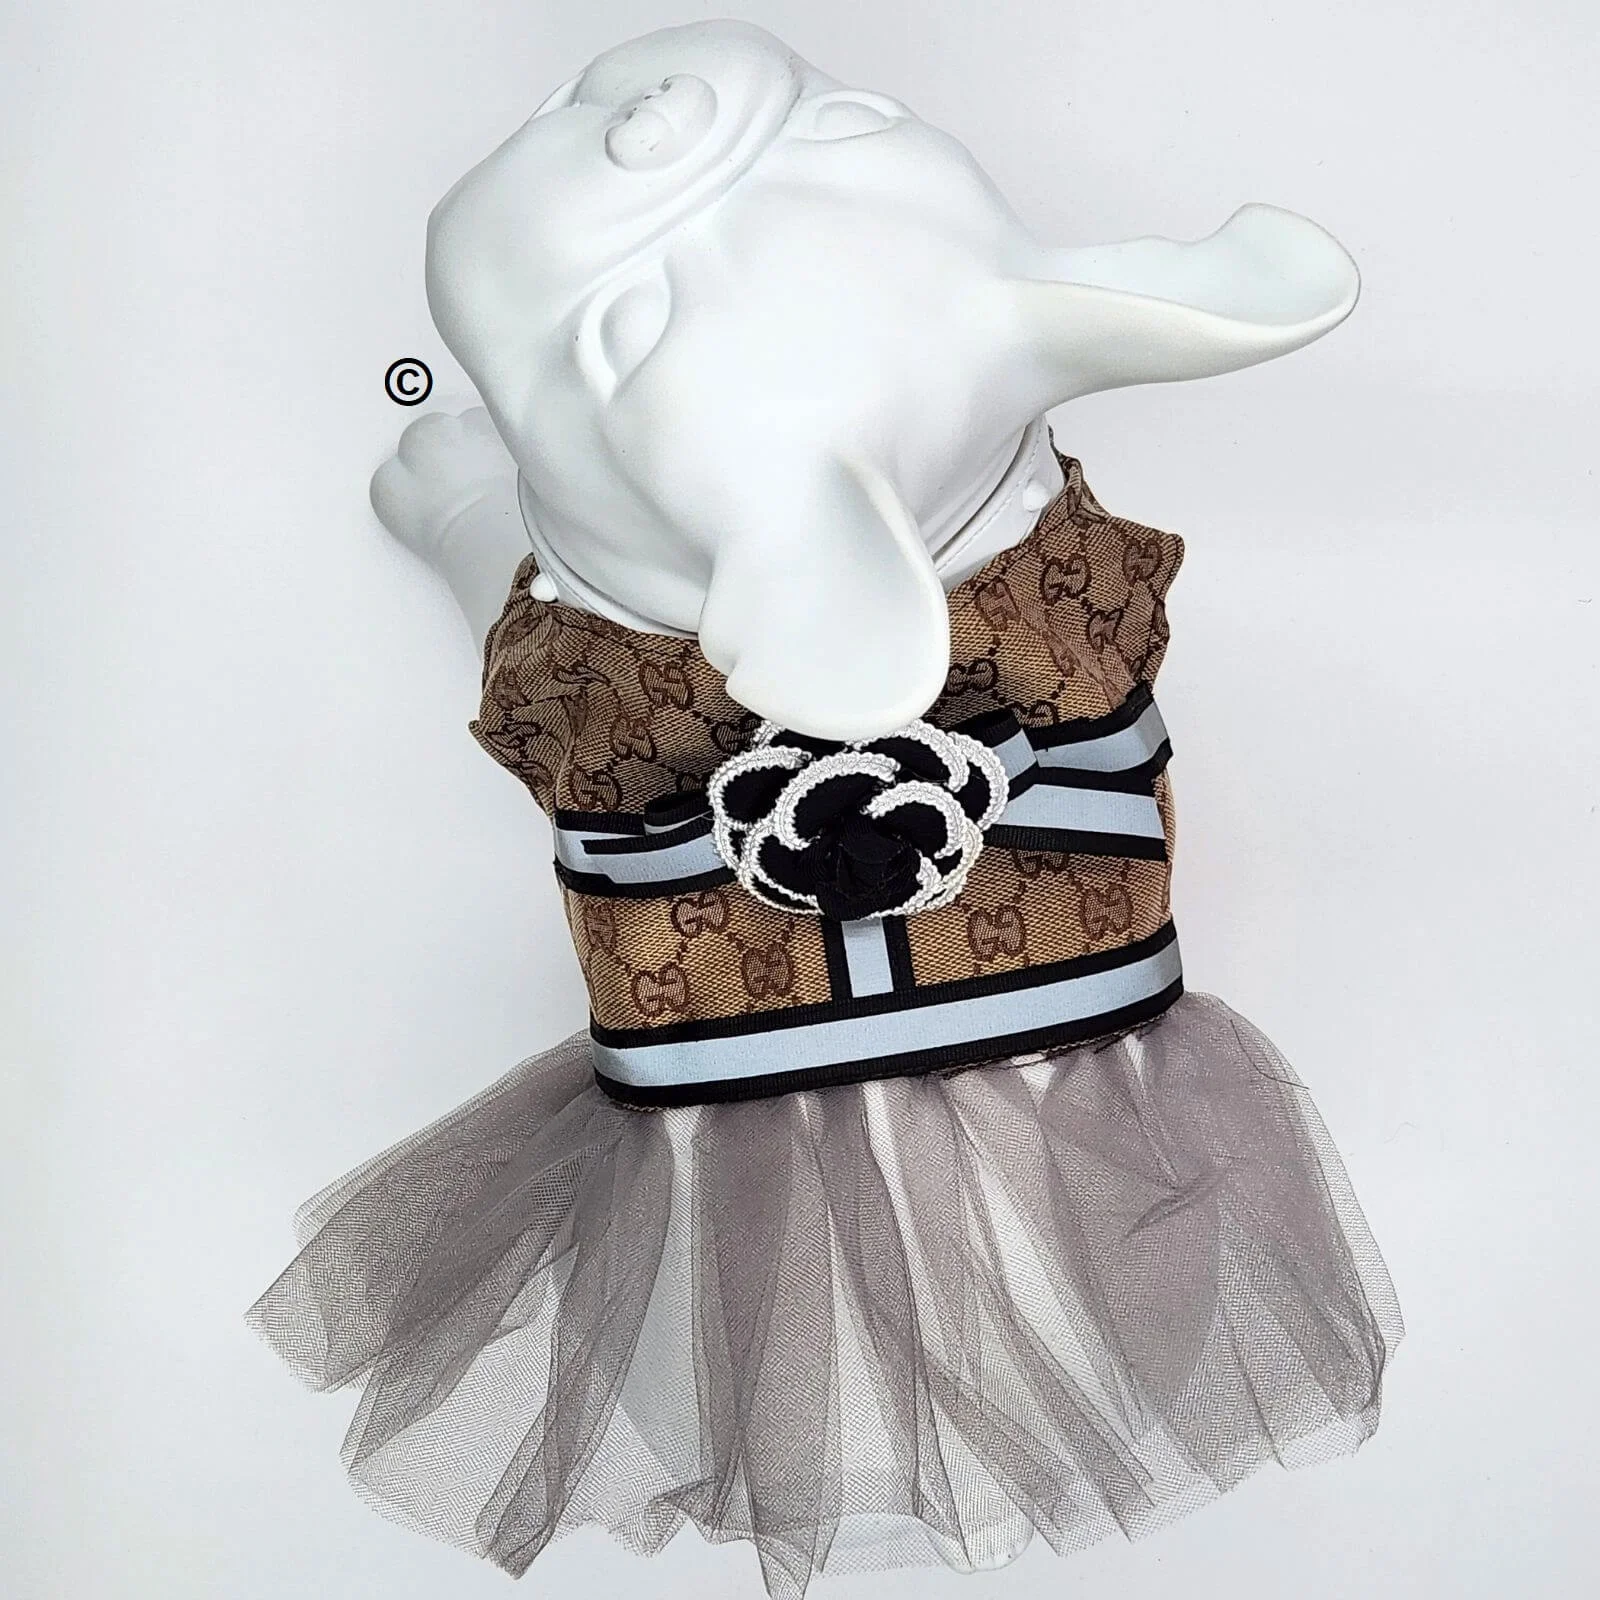 gucci dress with tuape mesh skirt for dogs